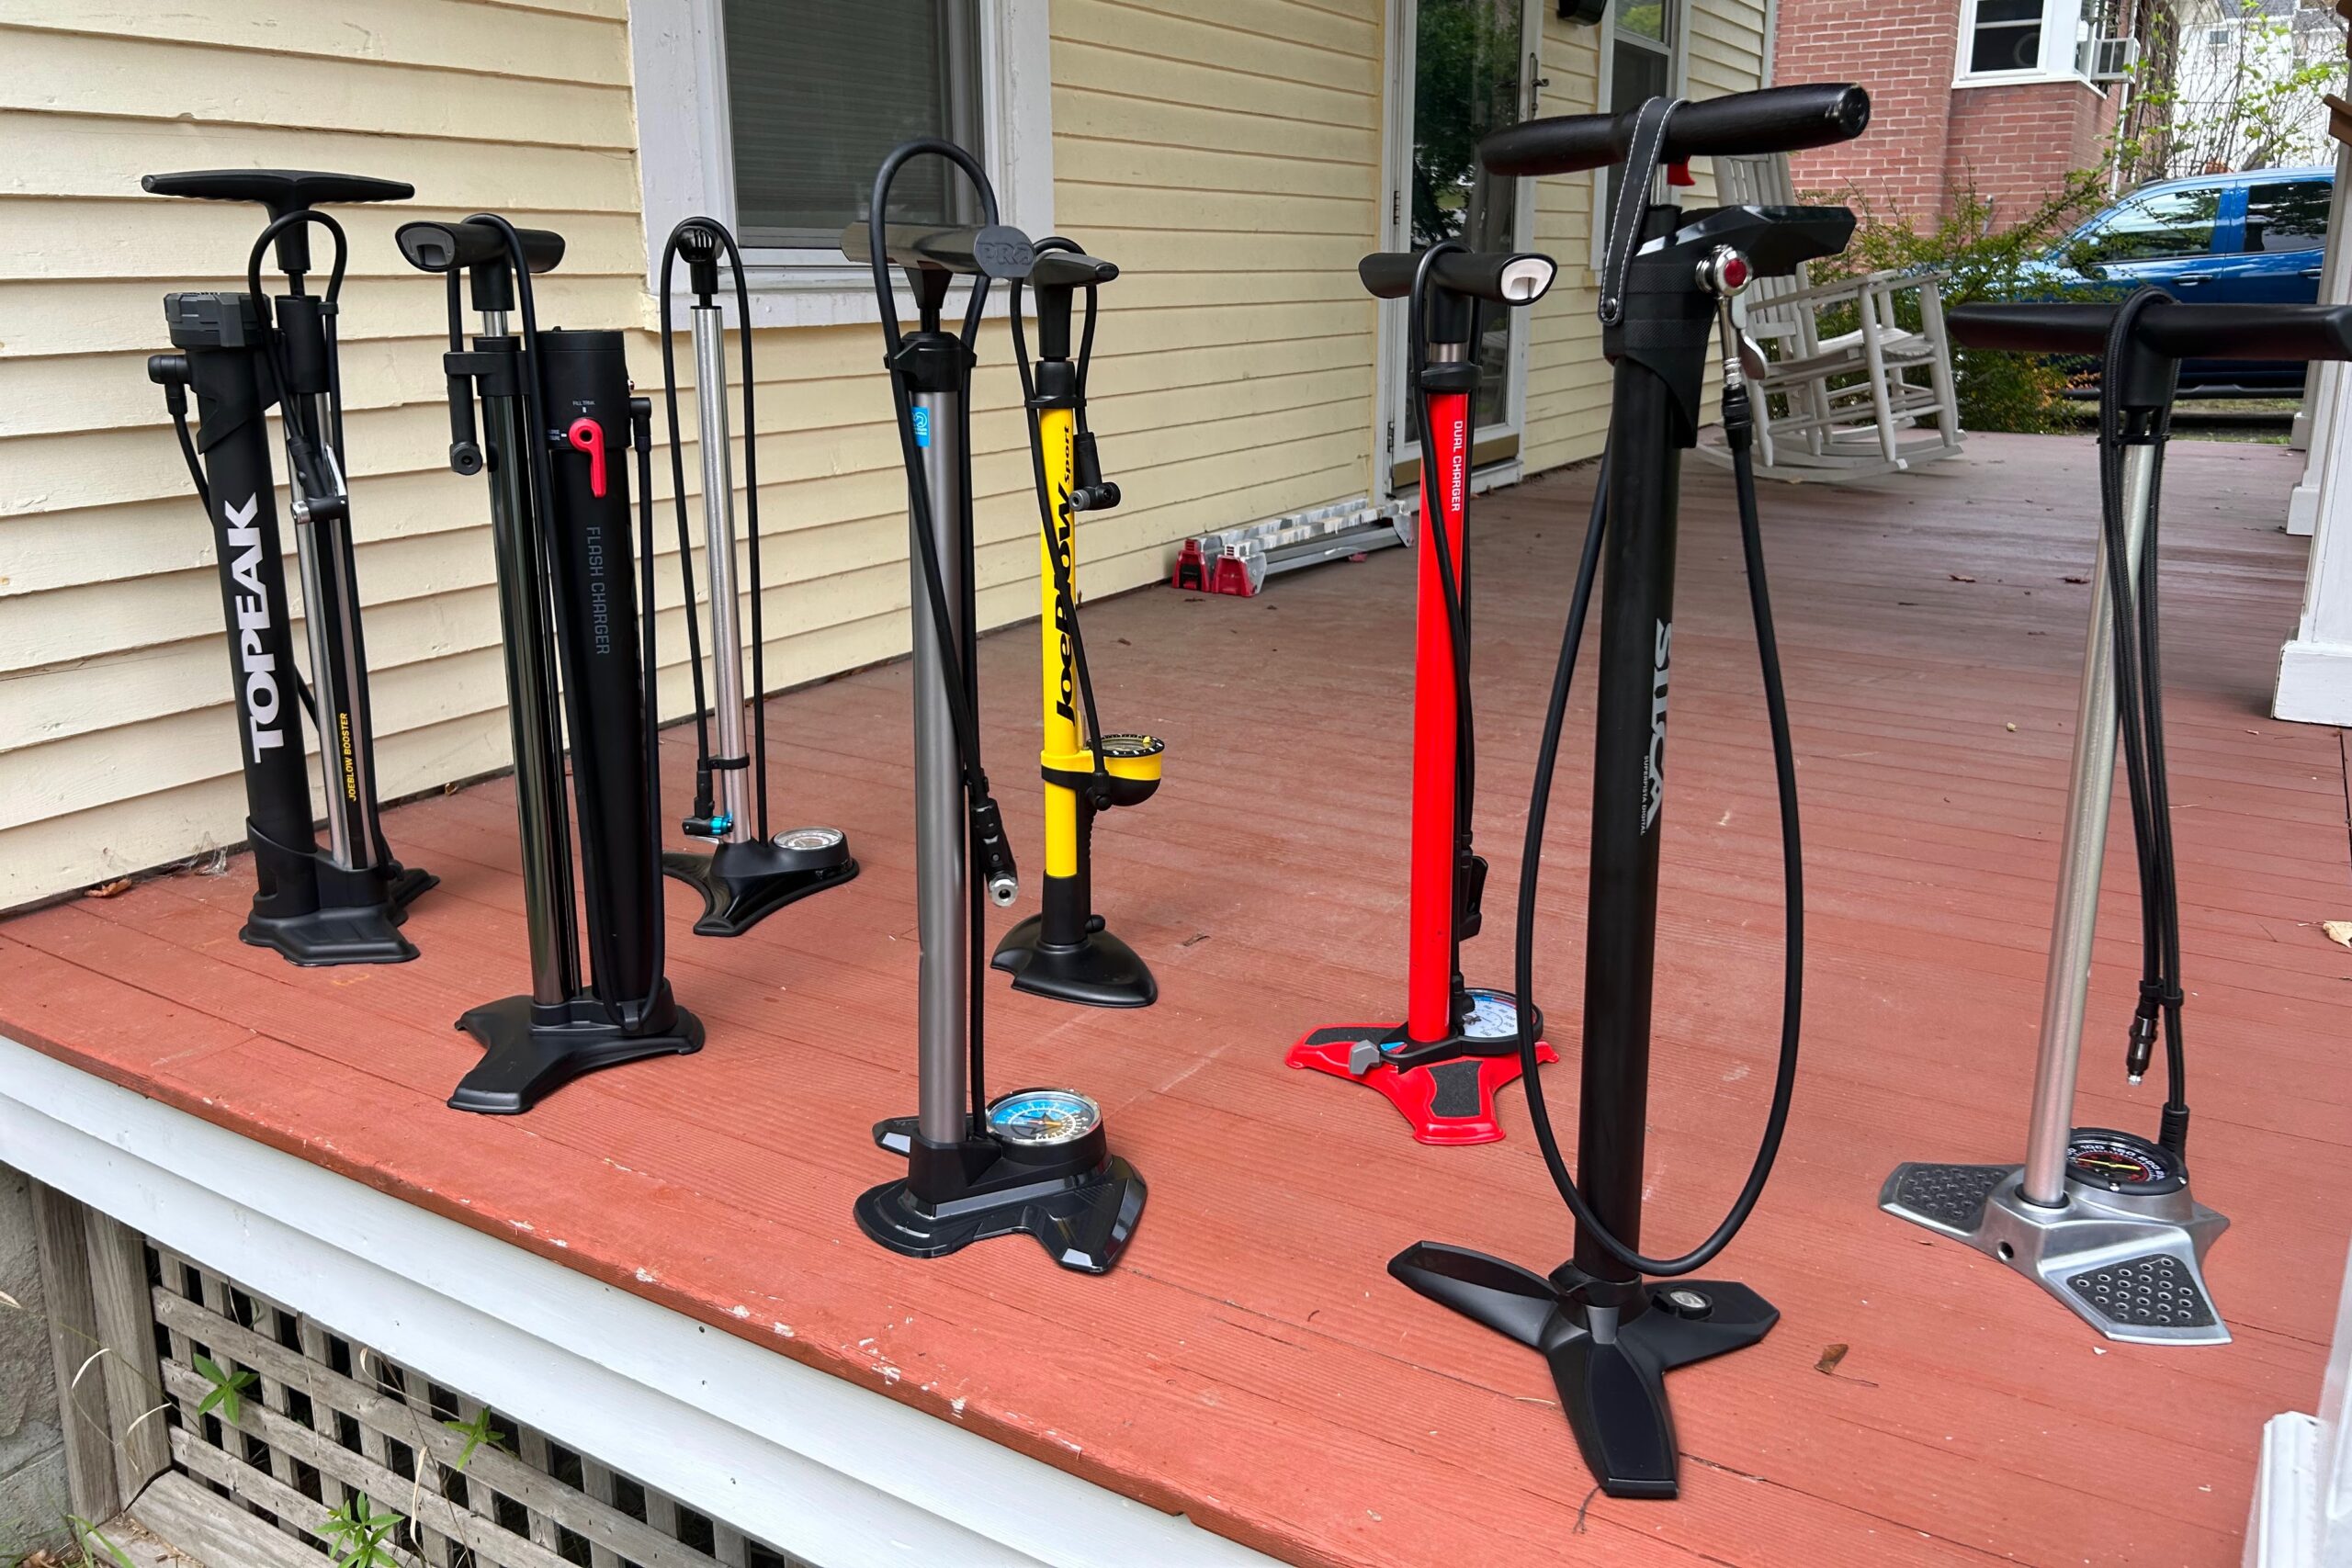 Group shot of most of the bike pumps we tested